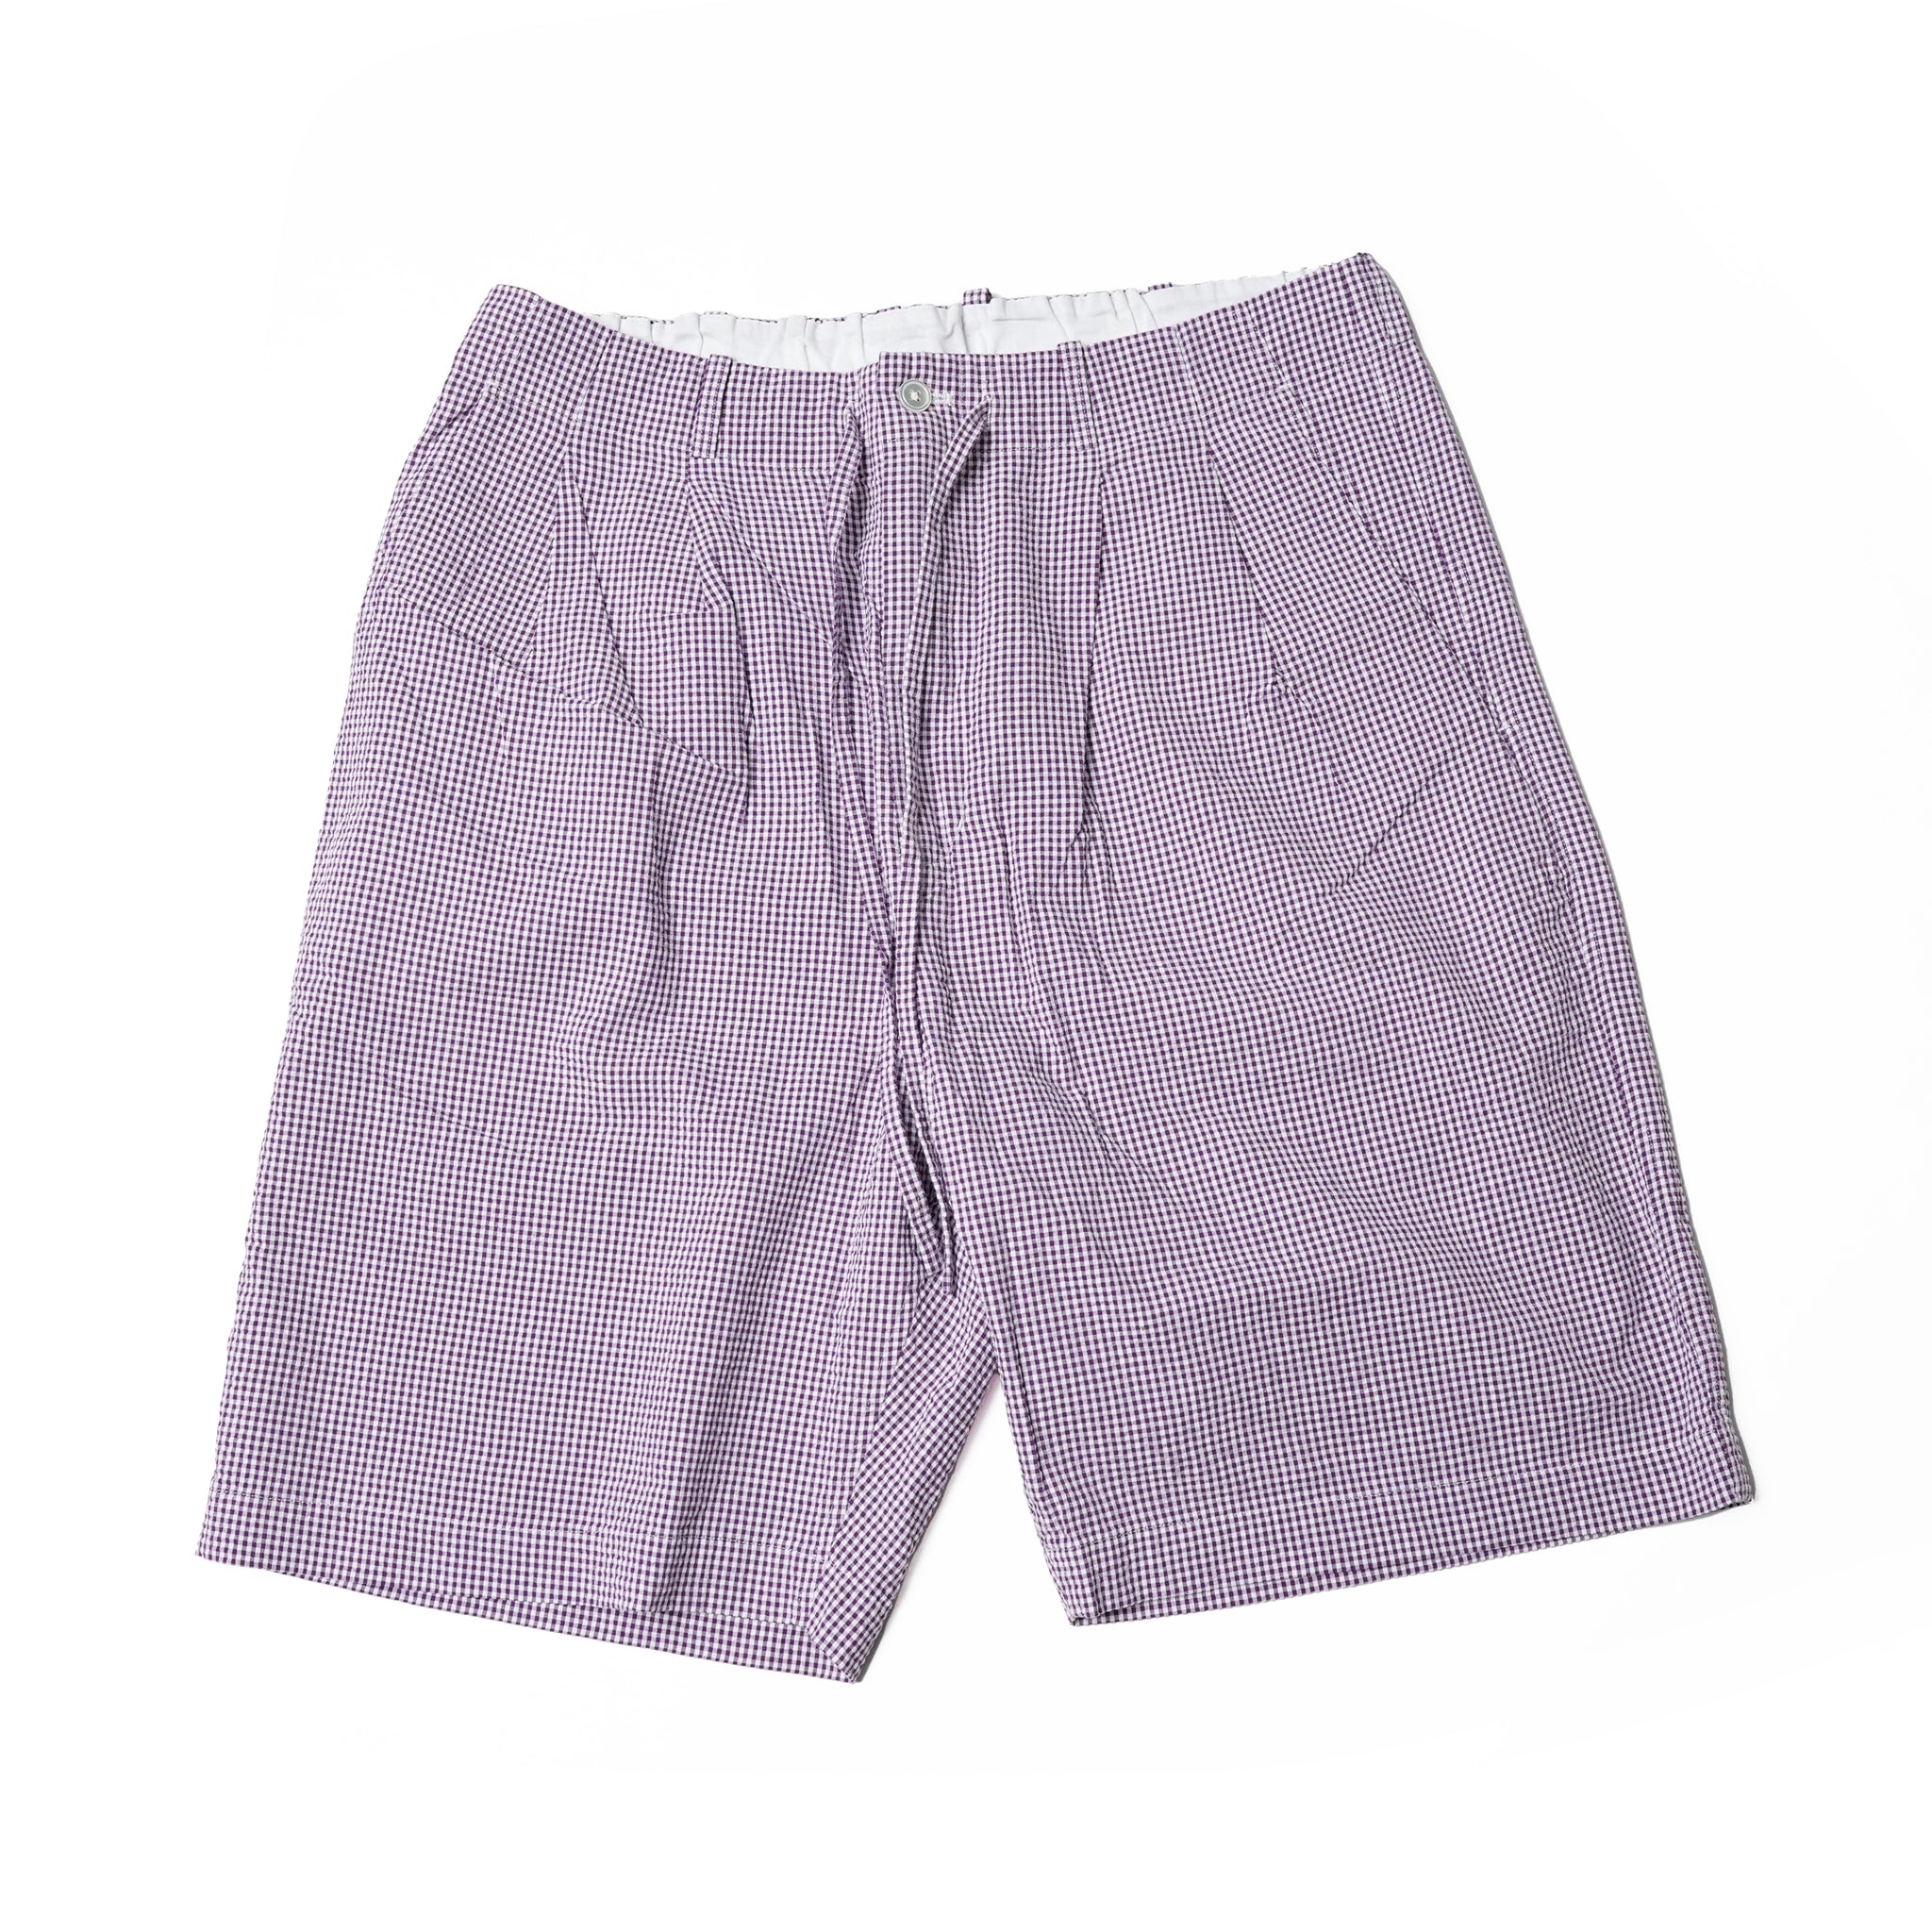 No:BES-03_A | Name:BAGS EASY SHORT PANTS-SOCCER GINGHAM | Color:Purple【CATTA_カッタ】【入荷予定アイテム・入荷連絡可能】